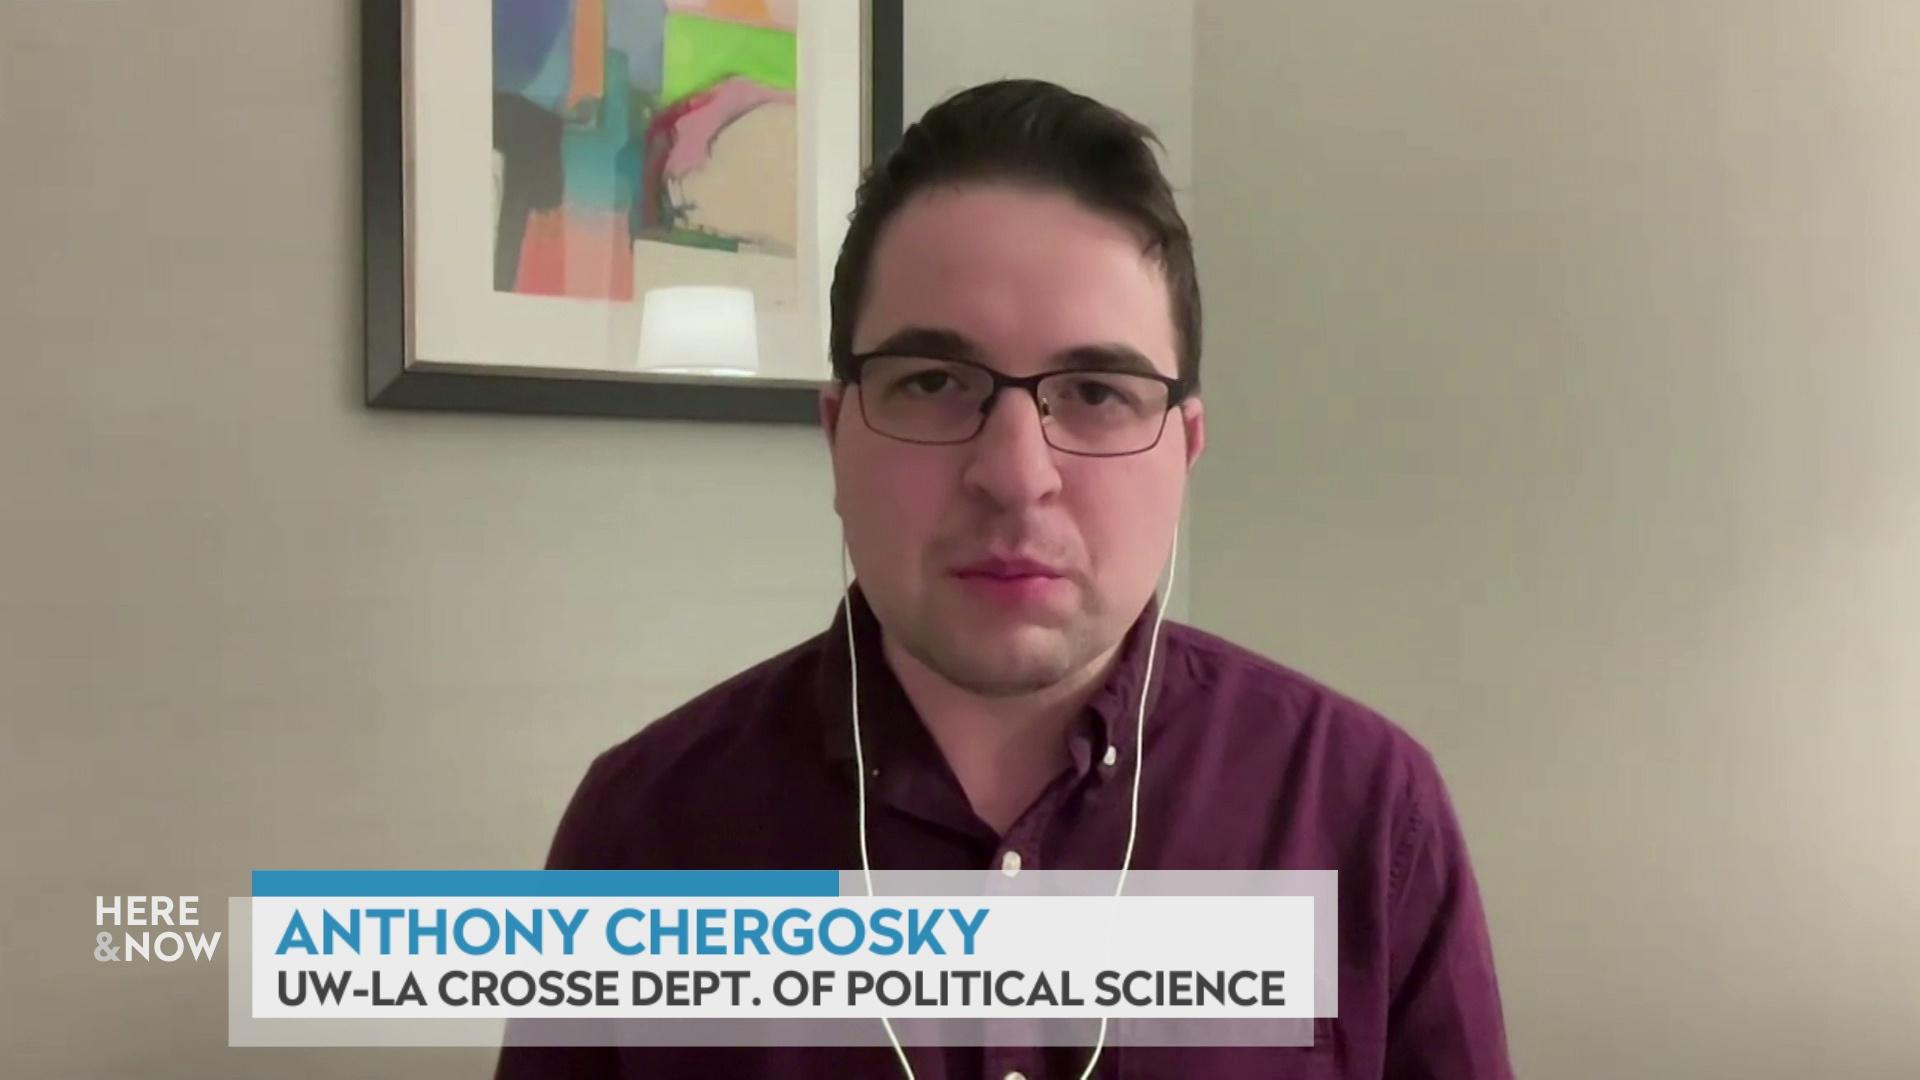 A still image from a video shows Anthony Chergosky seated in front of framed artwork on the wall with a graphic at bottom reading 'Anthony Chergosky' and 'UW-La Crosse Dept. of Political Science.'